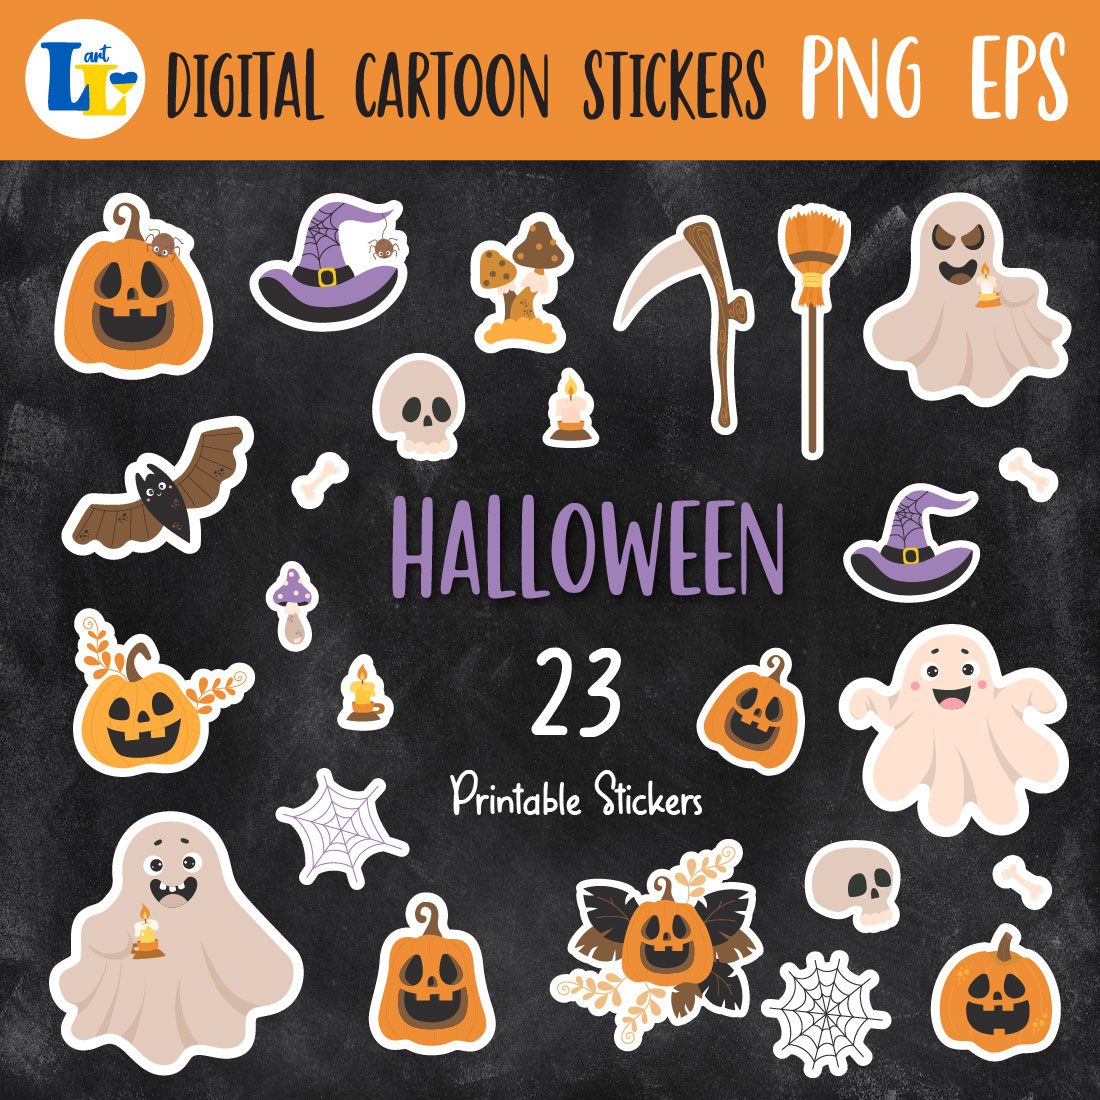 Doodle candles printable stickers